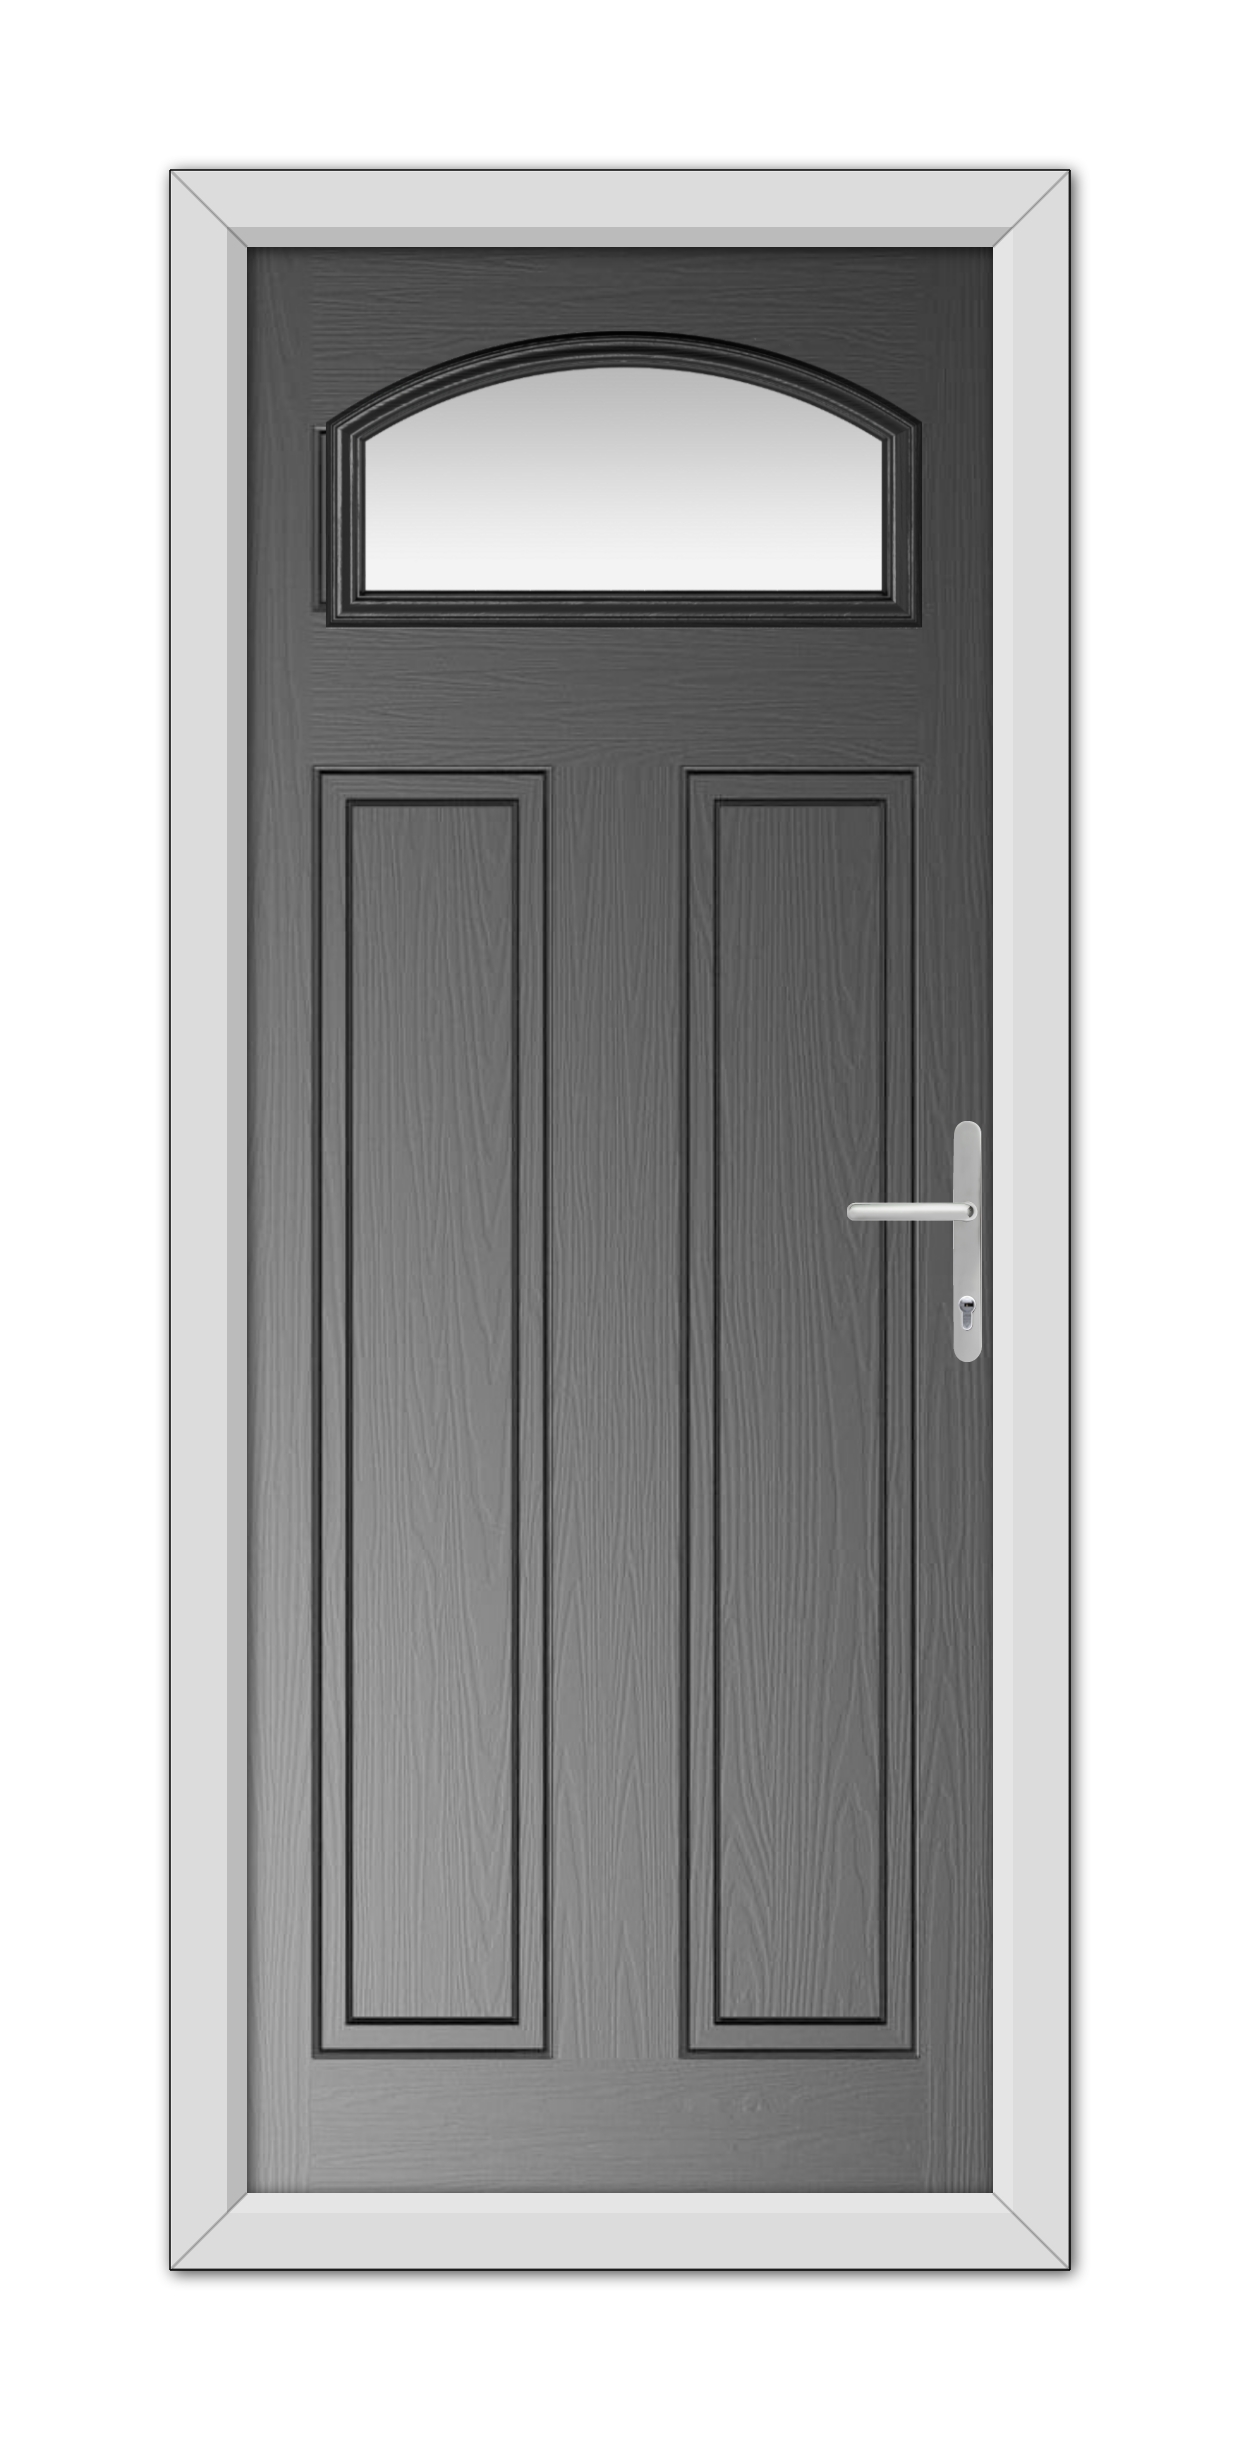 A modern Black Harlington Composite Door 48mm Timber Core with a rounded top window and a metallic handle, set within a white frame.